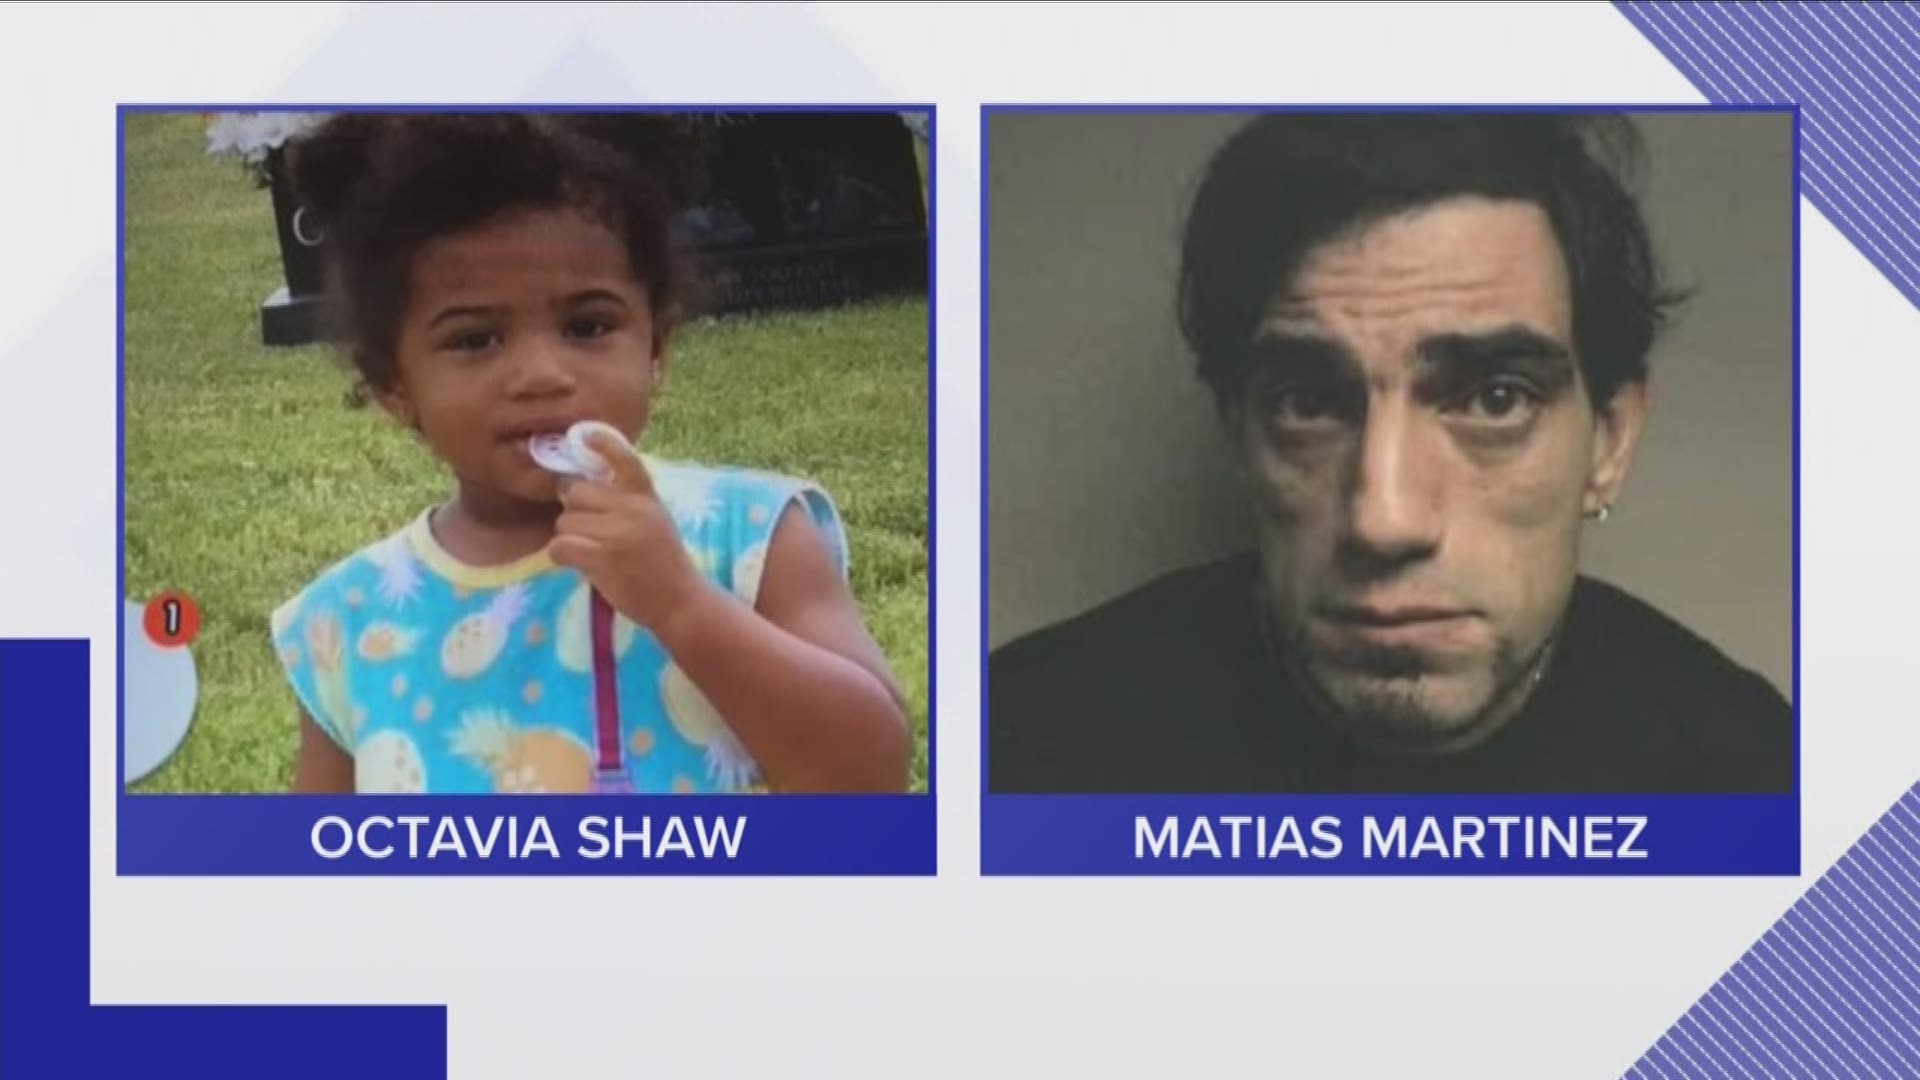 The TBI said 23-month-old Octavia Shaw was abducted by 37-year-old Matias Matrinez after he ran off with her following a traffic stop.